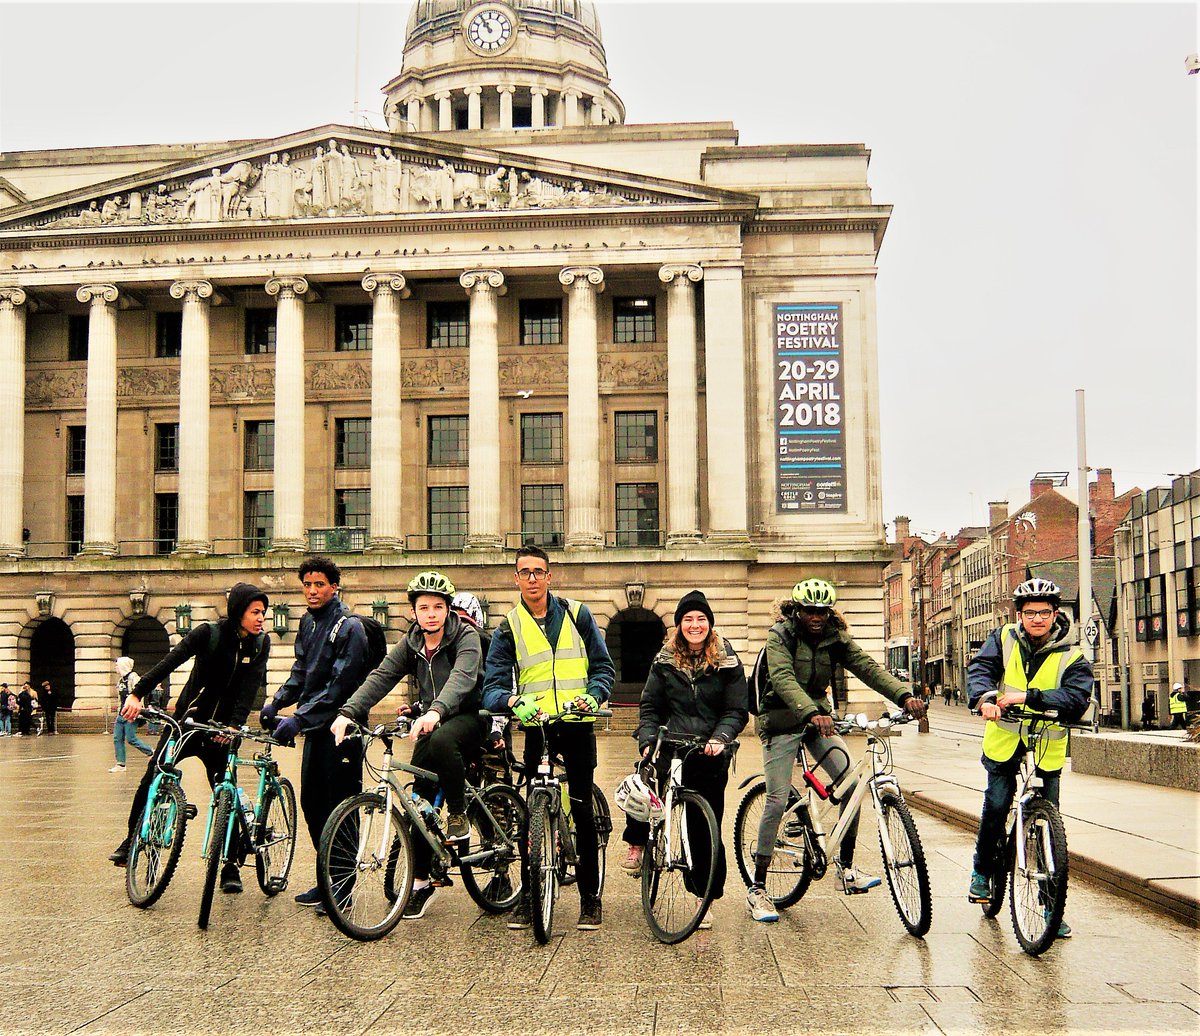 A huge THANK YOU every one of you that has donated a bike to us. We could not have done this project without you. Here we are on our celebratory bike ride this weekend; every young person built their own bike to keep from donated parts. #FeelGood  #notts #communityfoundations